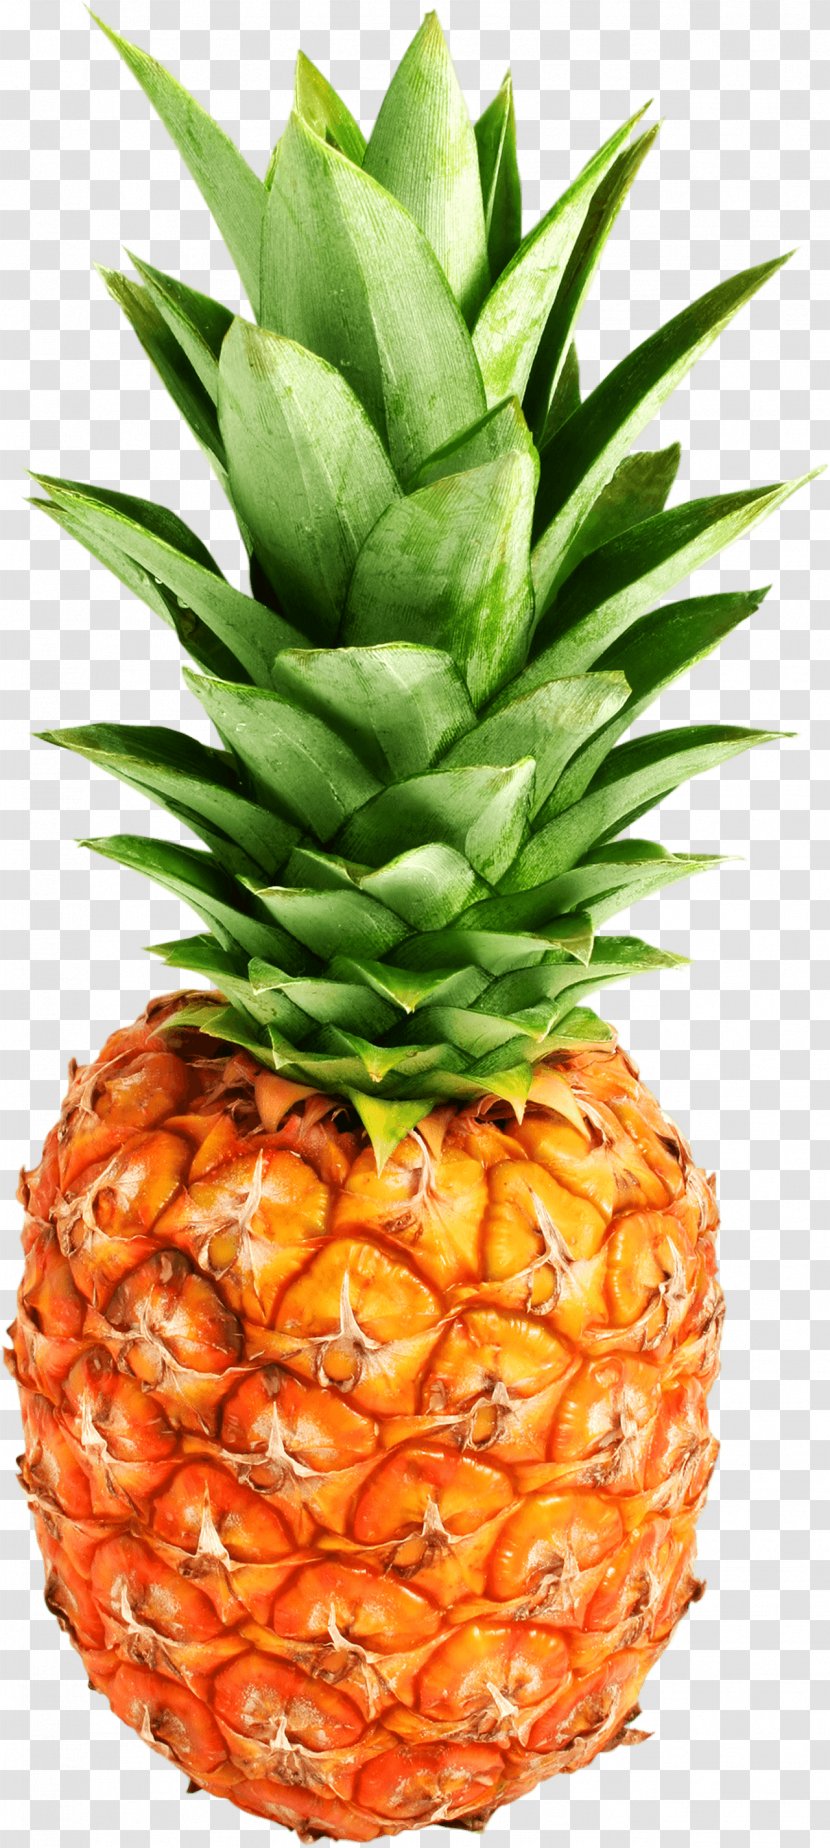 Juice IPhone 7 Pineapple - Produce - Image Download Transparent PNG